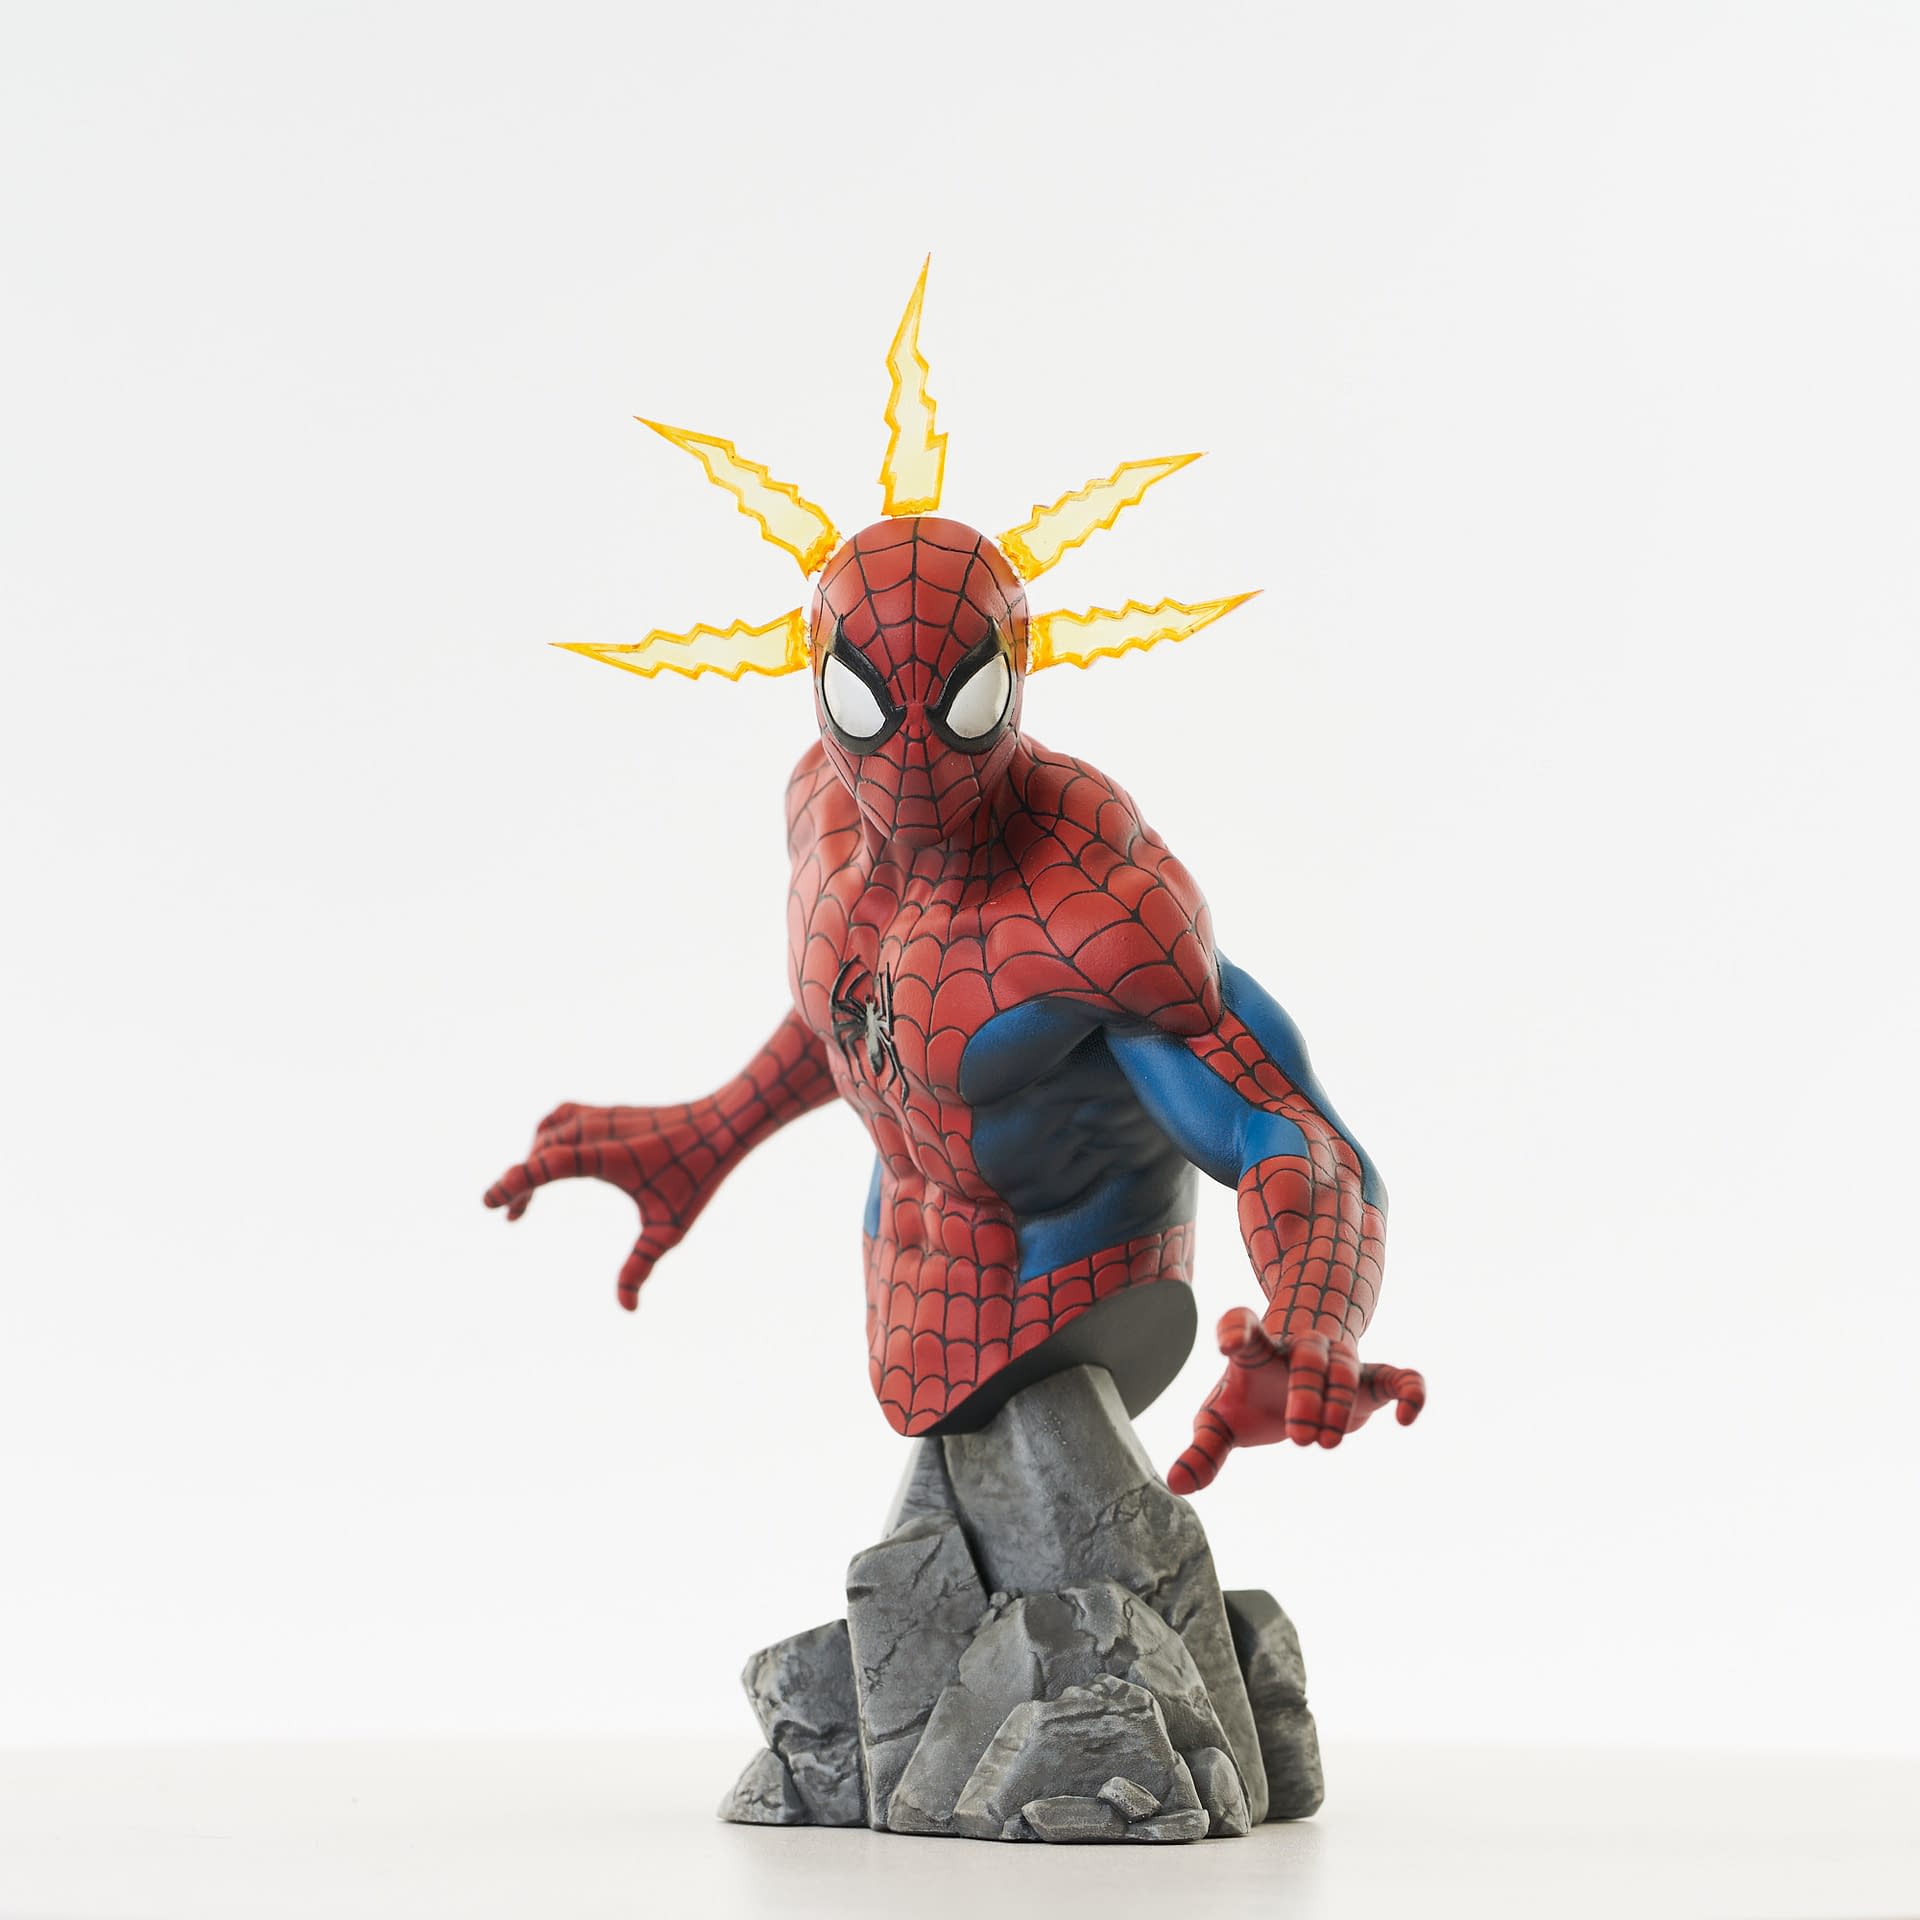 Spider-Man Spidey-Sense Bust Coming From Diamond Select Toys